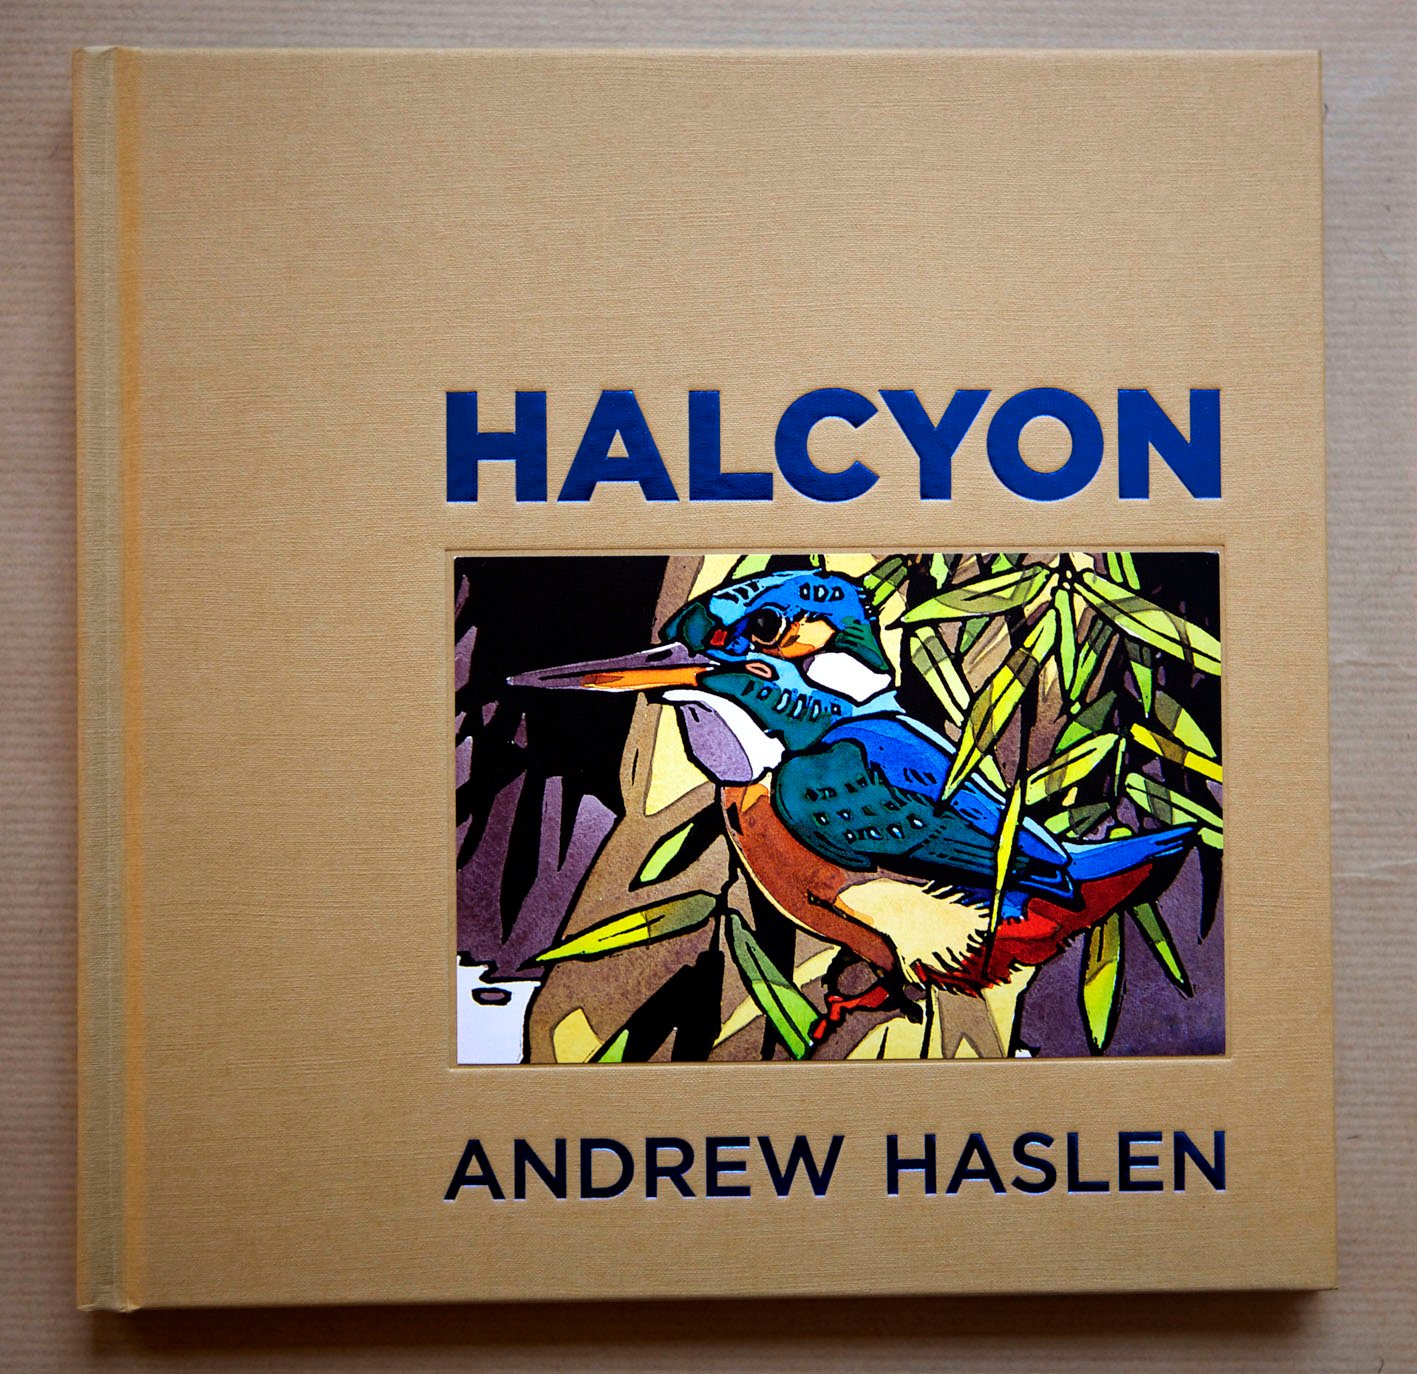 Image of Halcyon by Andrew Haslen